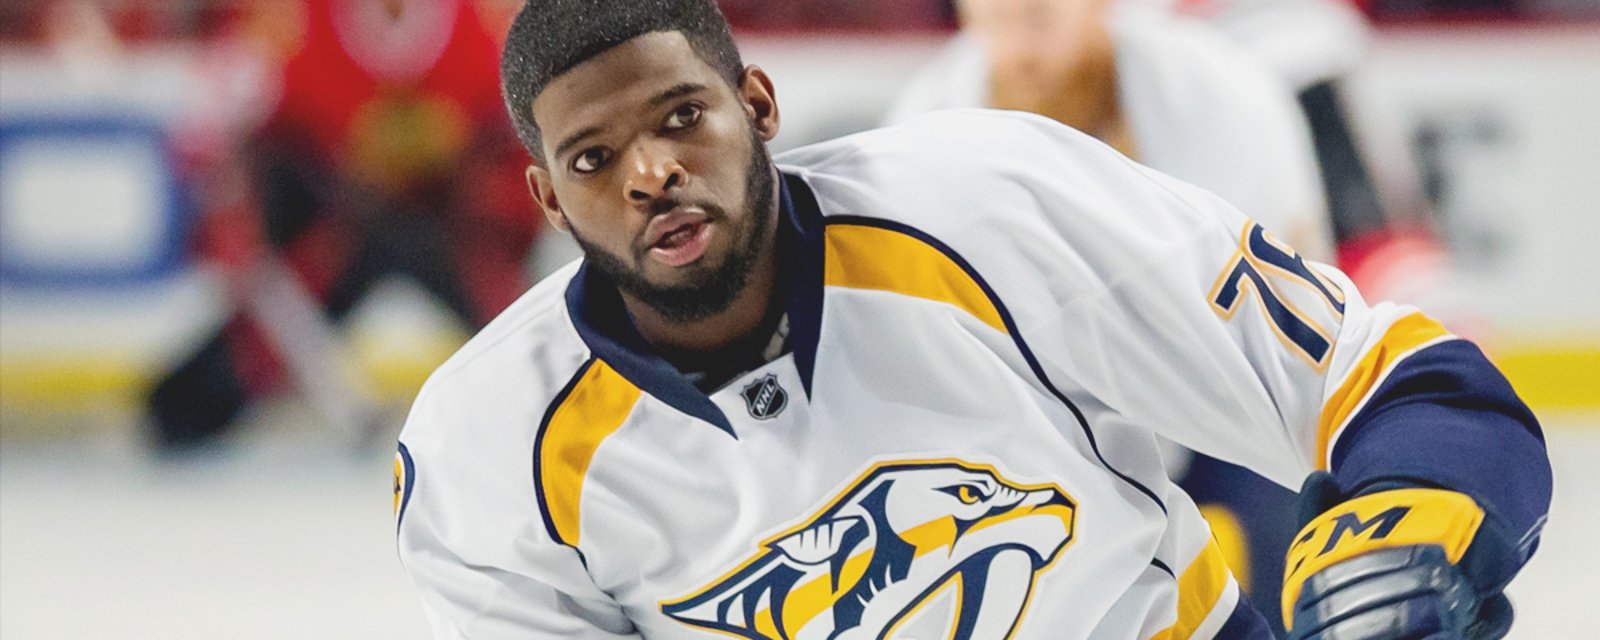 P.K. Subban called “a clown” by veteran insider live on TV